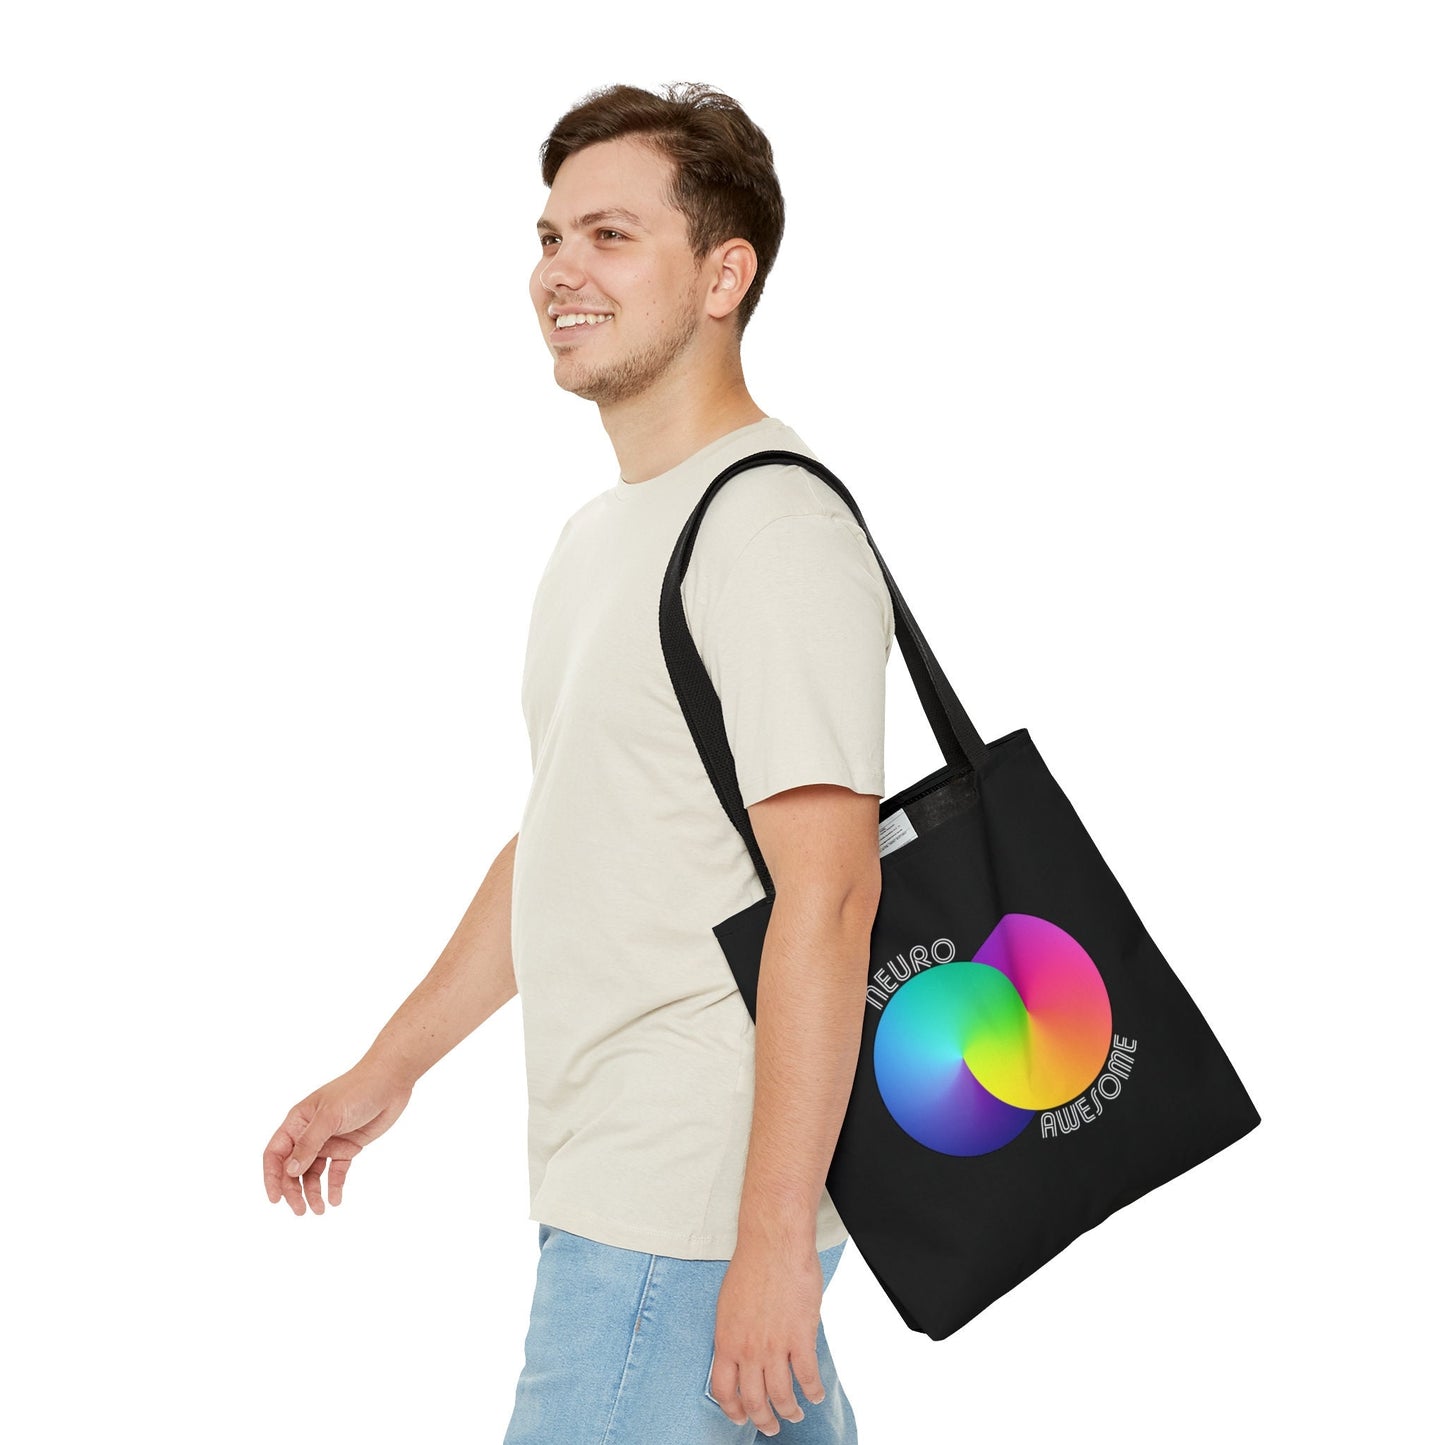 Neuroawesome Stuttering Autism Infinity Tote Bag (3 sizes)